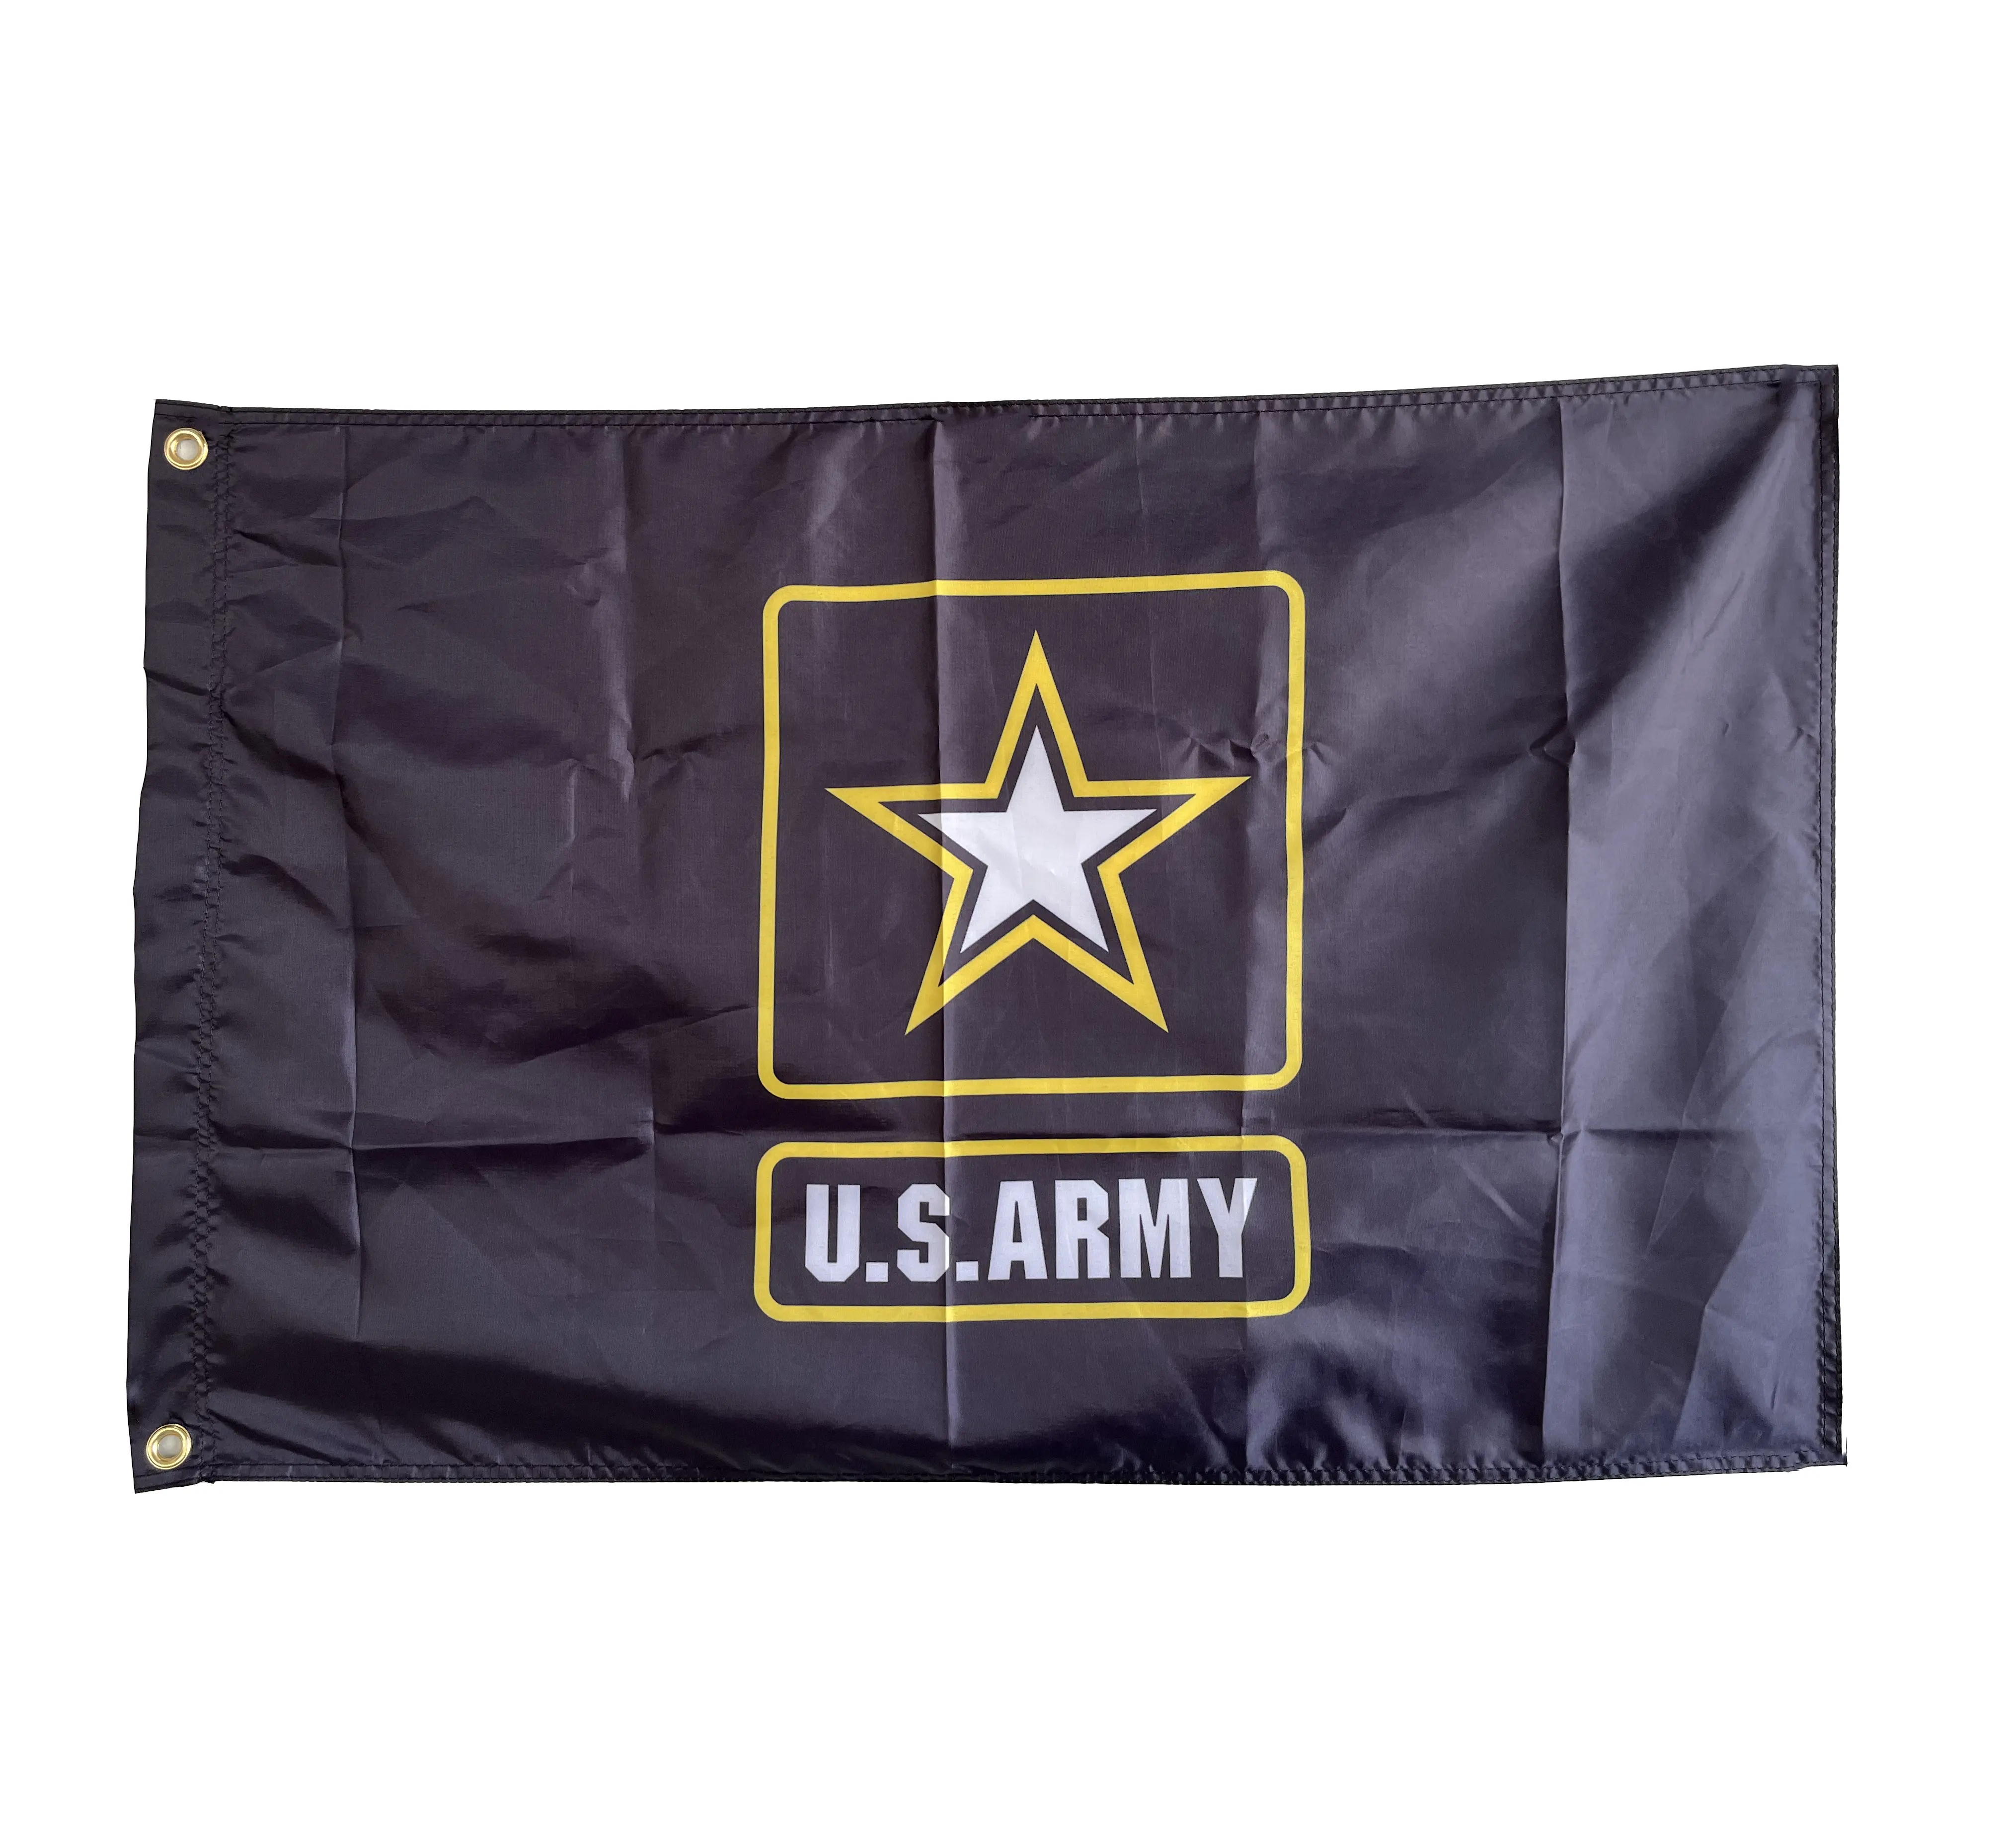 U.S Army 3*5 FT Flags LAND FOR SALE Flags For Promotion Custom Size Spanish National Flags